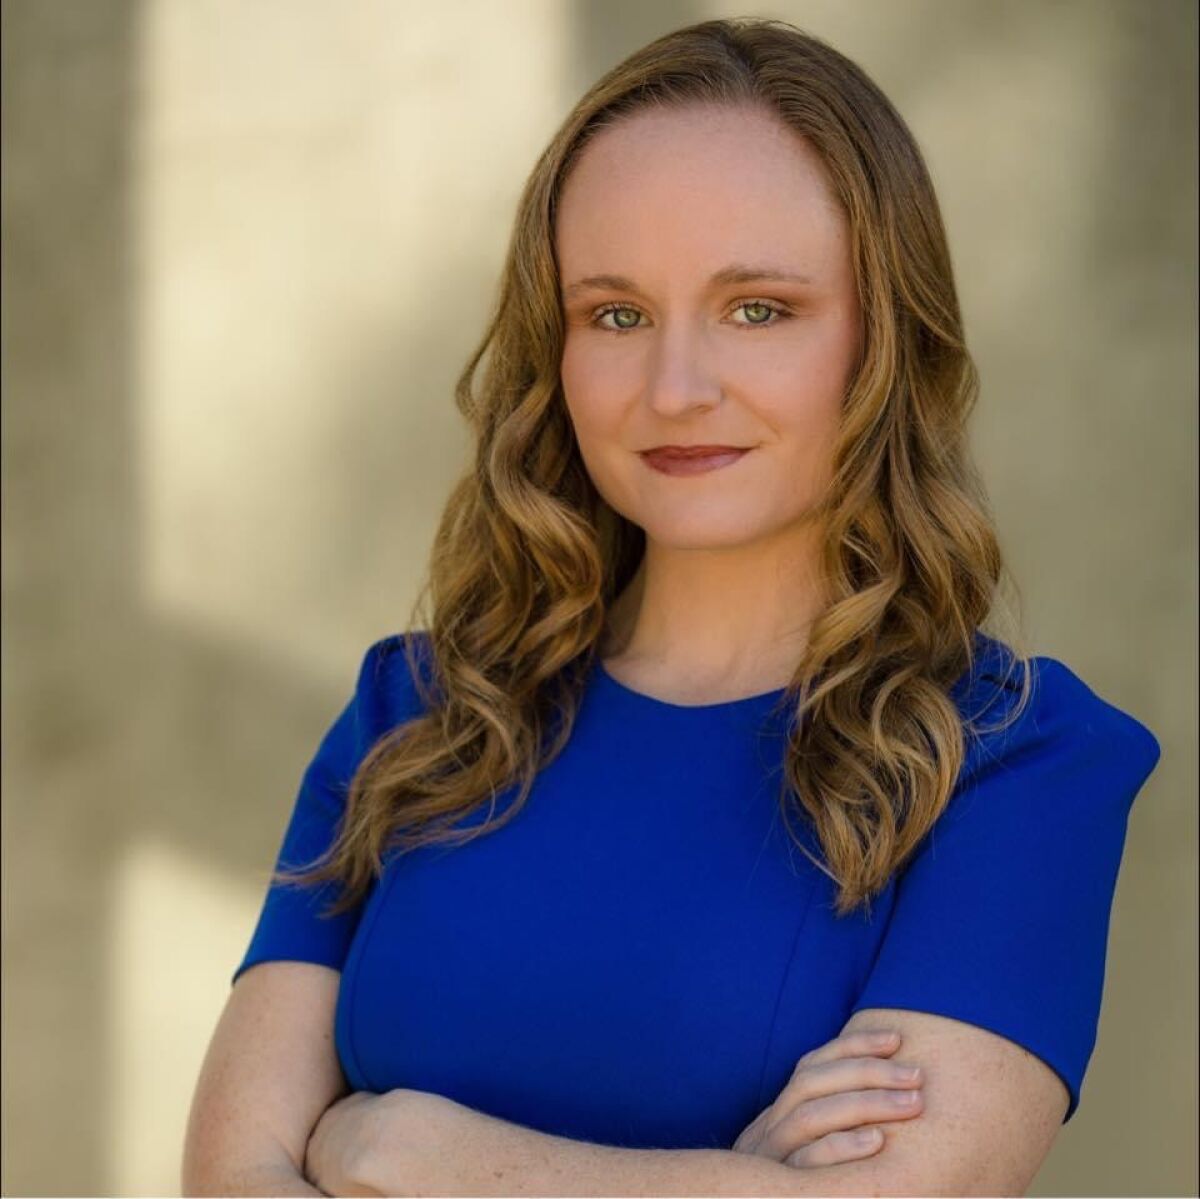 Savannah Cannon of Point Loma is a network engineer and the author of "Corporal Cannon: A Female Marine in Afghanistan."